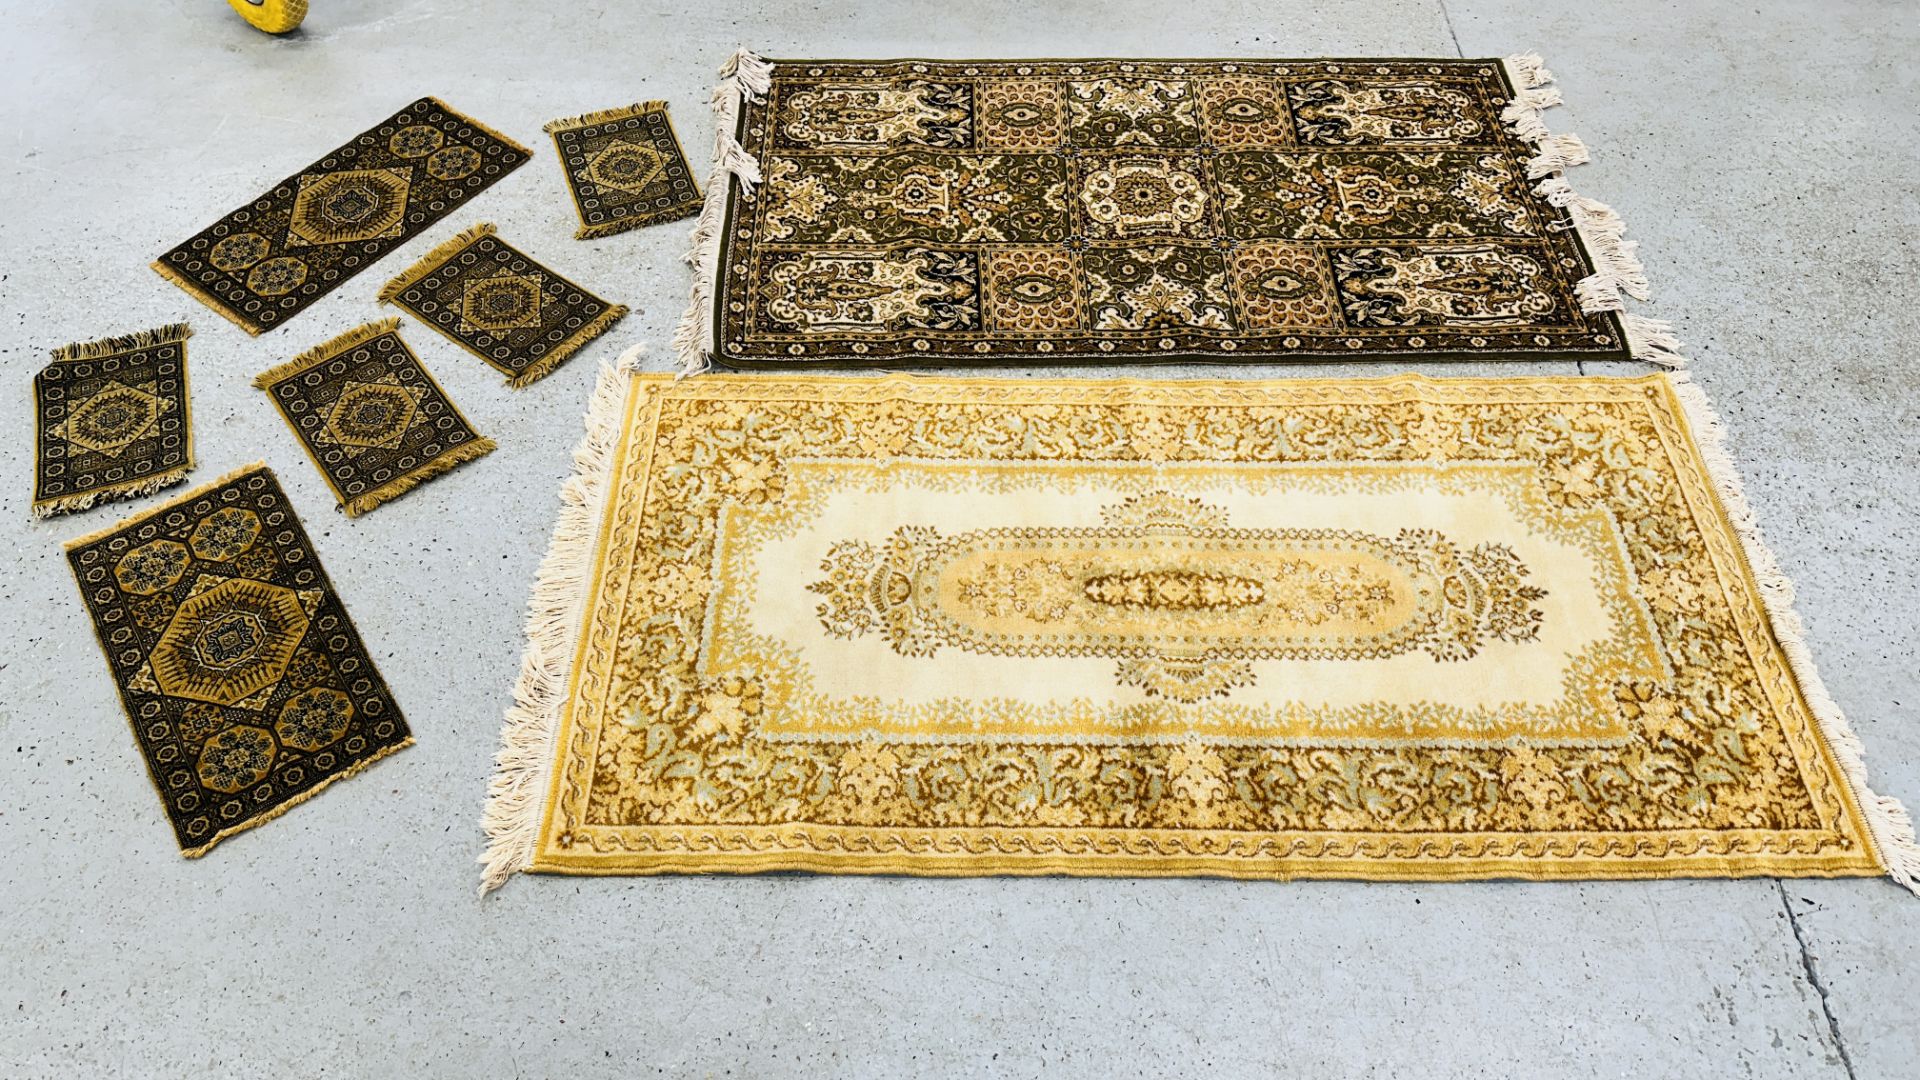 TWO MODERN MACHINE MADE EASTERN DESIGN RUGS ALONG WITH A GROUP OF SMALL EASTERN DESIGN RUGS.